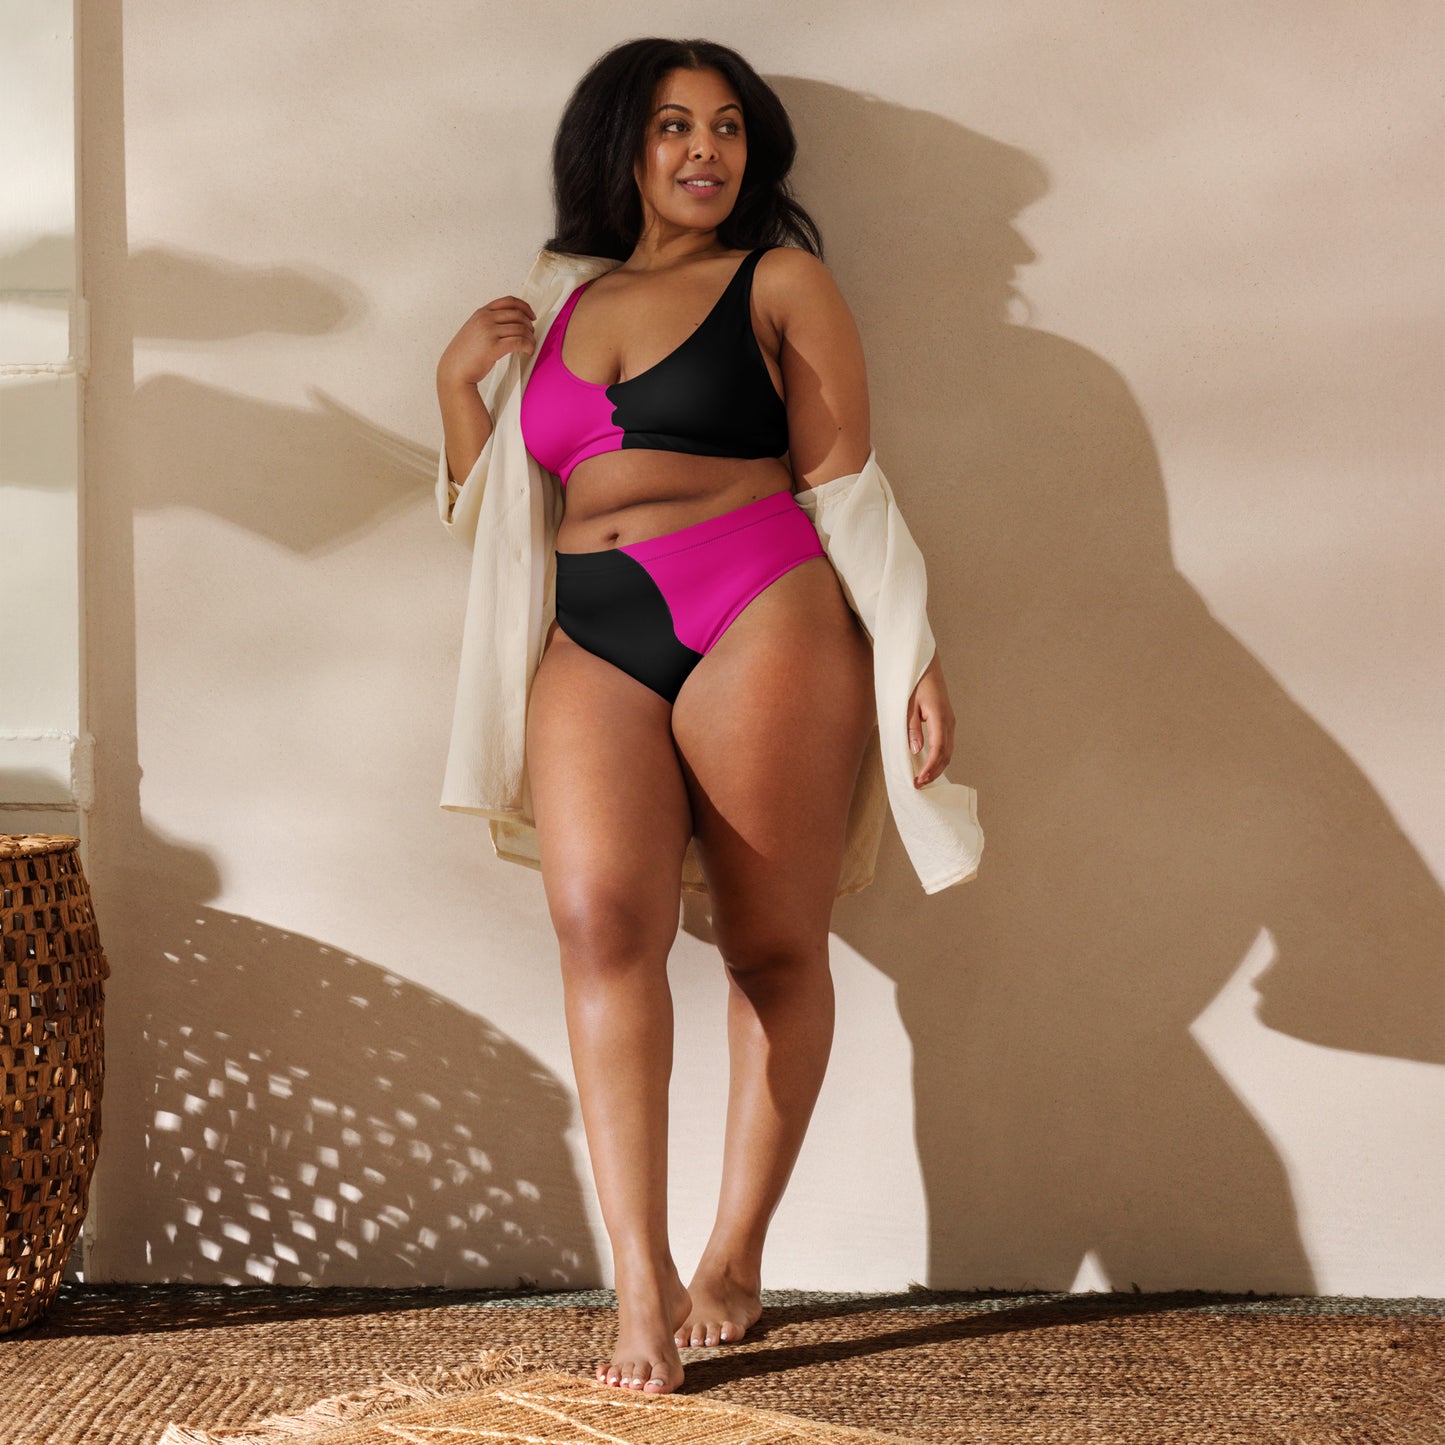 LBS Motivate Merch High-Waisted Bikini - Set Goals, Own the Spotlight - Your key to success and spotlight-worthy confidence! Plus Size